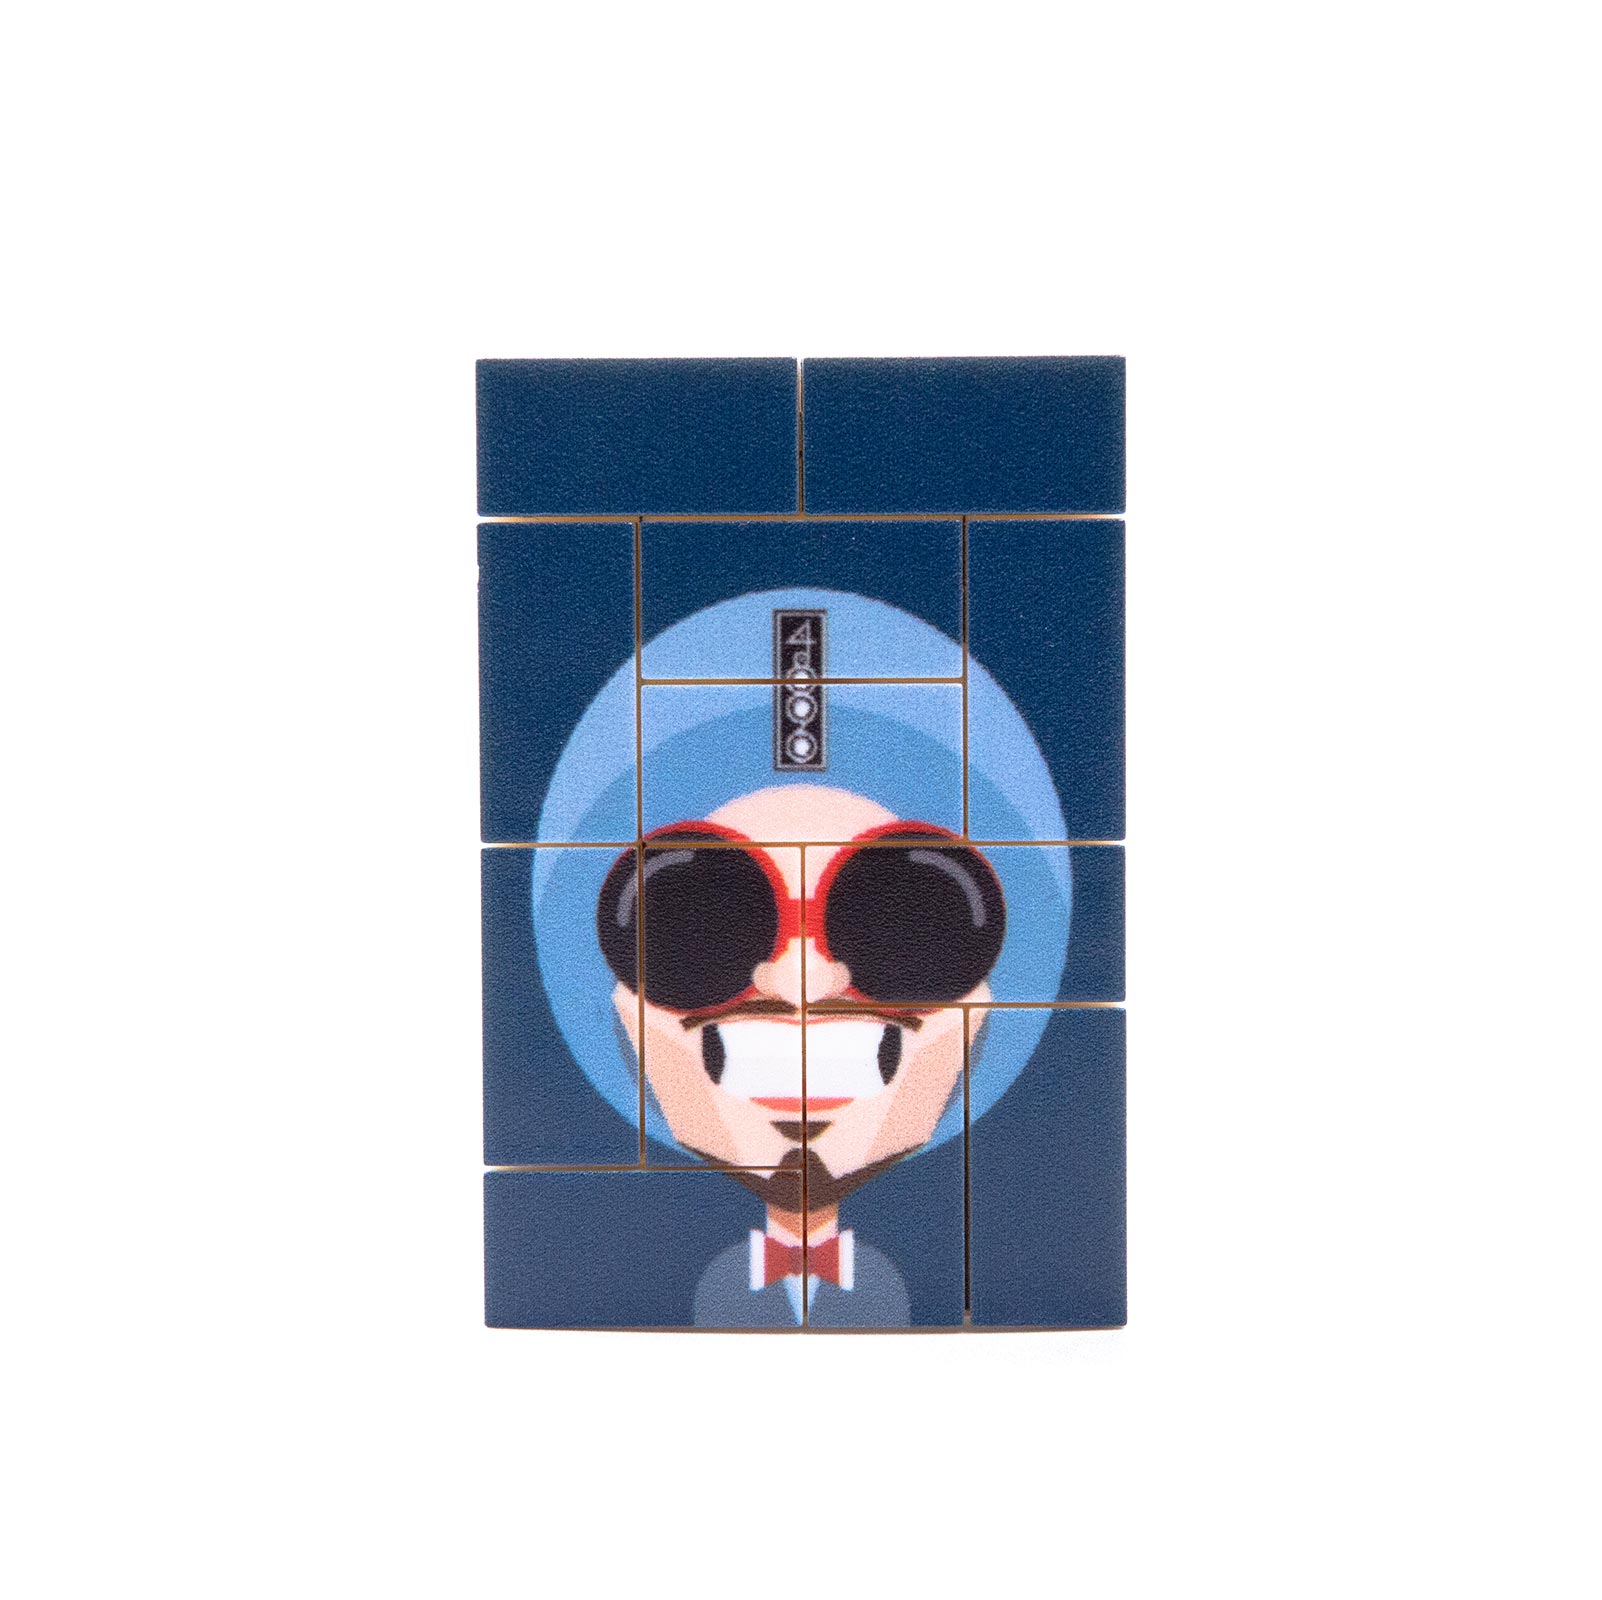 4896 x Namewee Magnet Puzzle (Blue)